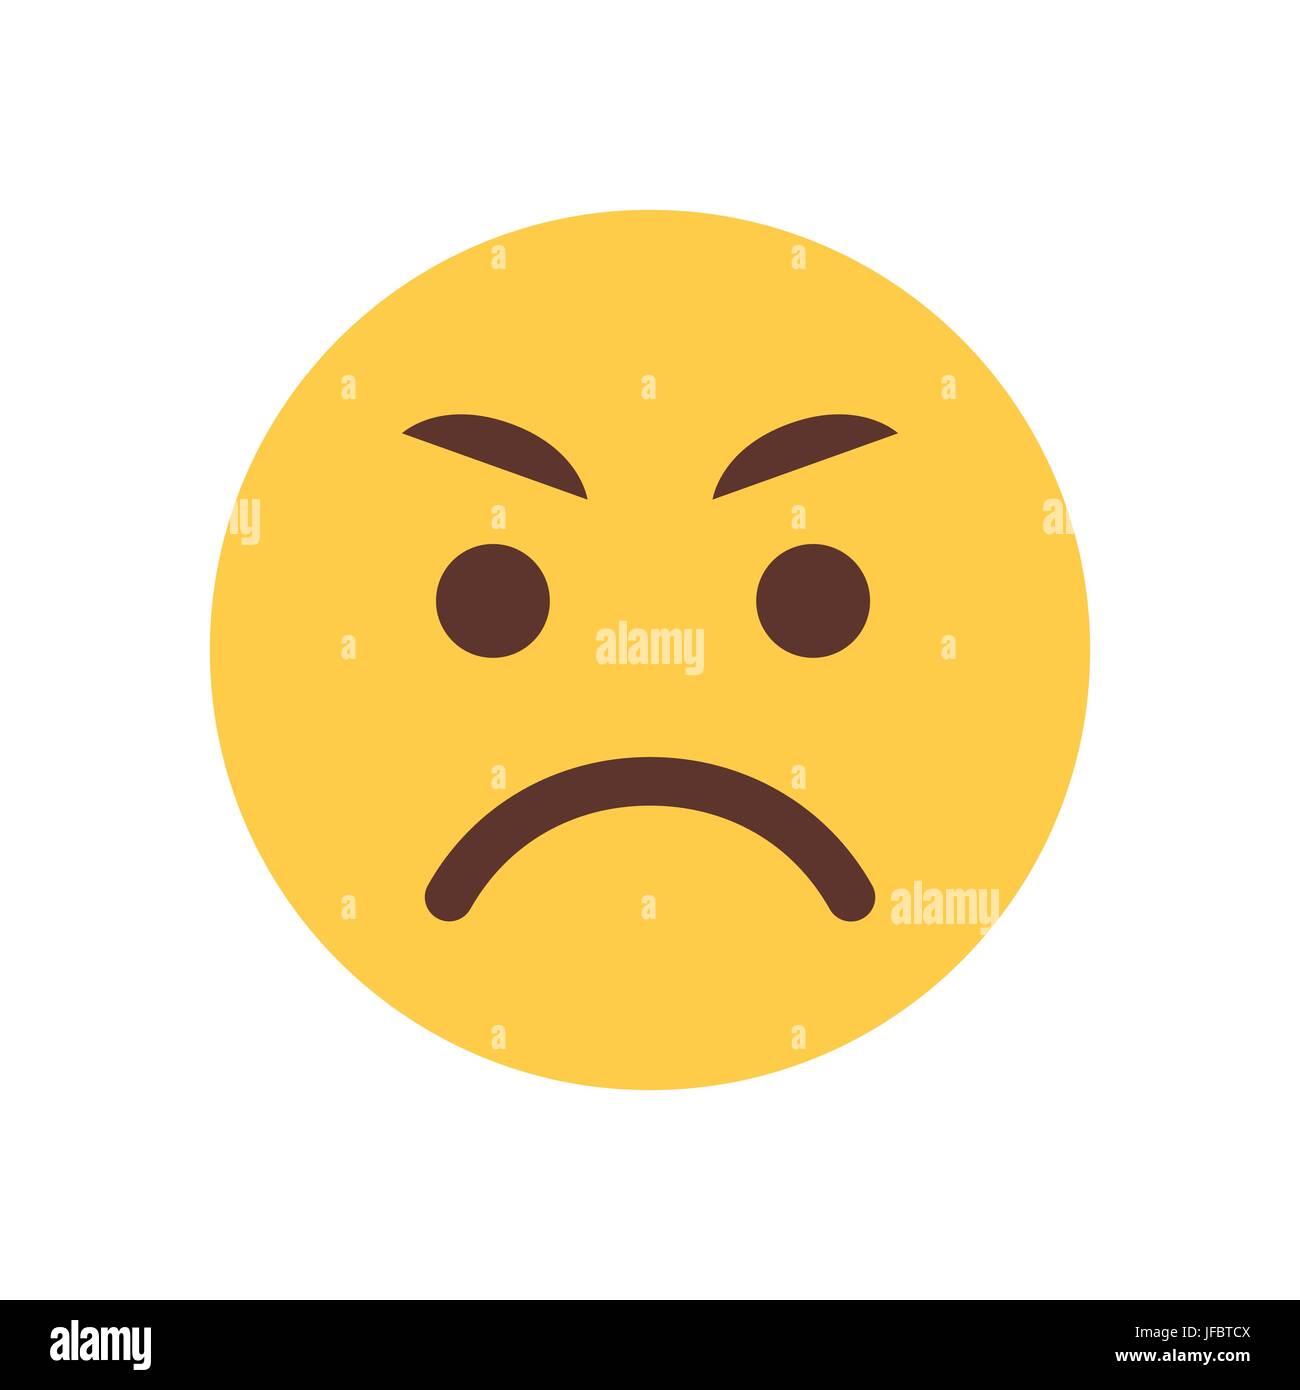 Yellow Angry Cartoon Face Emoji People Emotion Icon Stock Vector